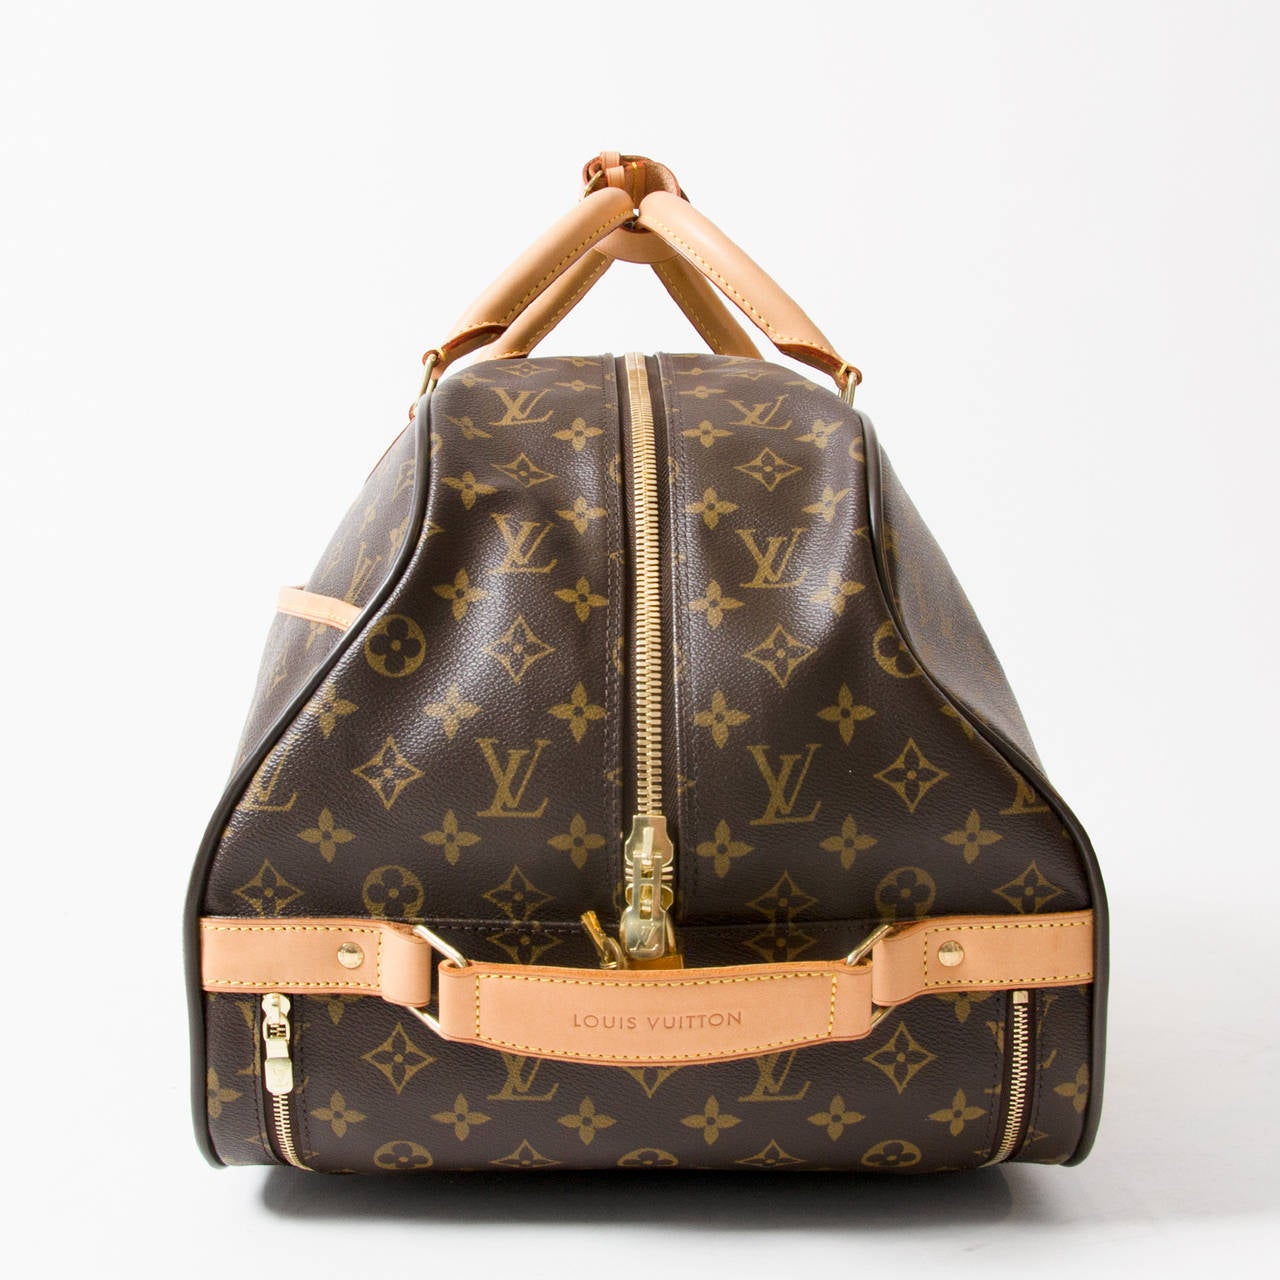 Louis Vuitton rolling handbag, the Eole 50 in monogram canvas. Can be handheld or rolled. The perfect carry-on hand luggage!